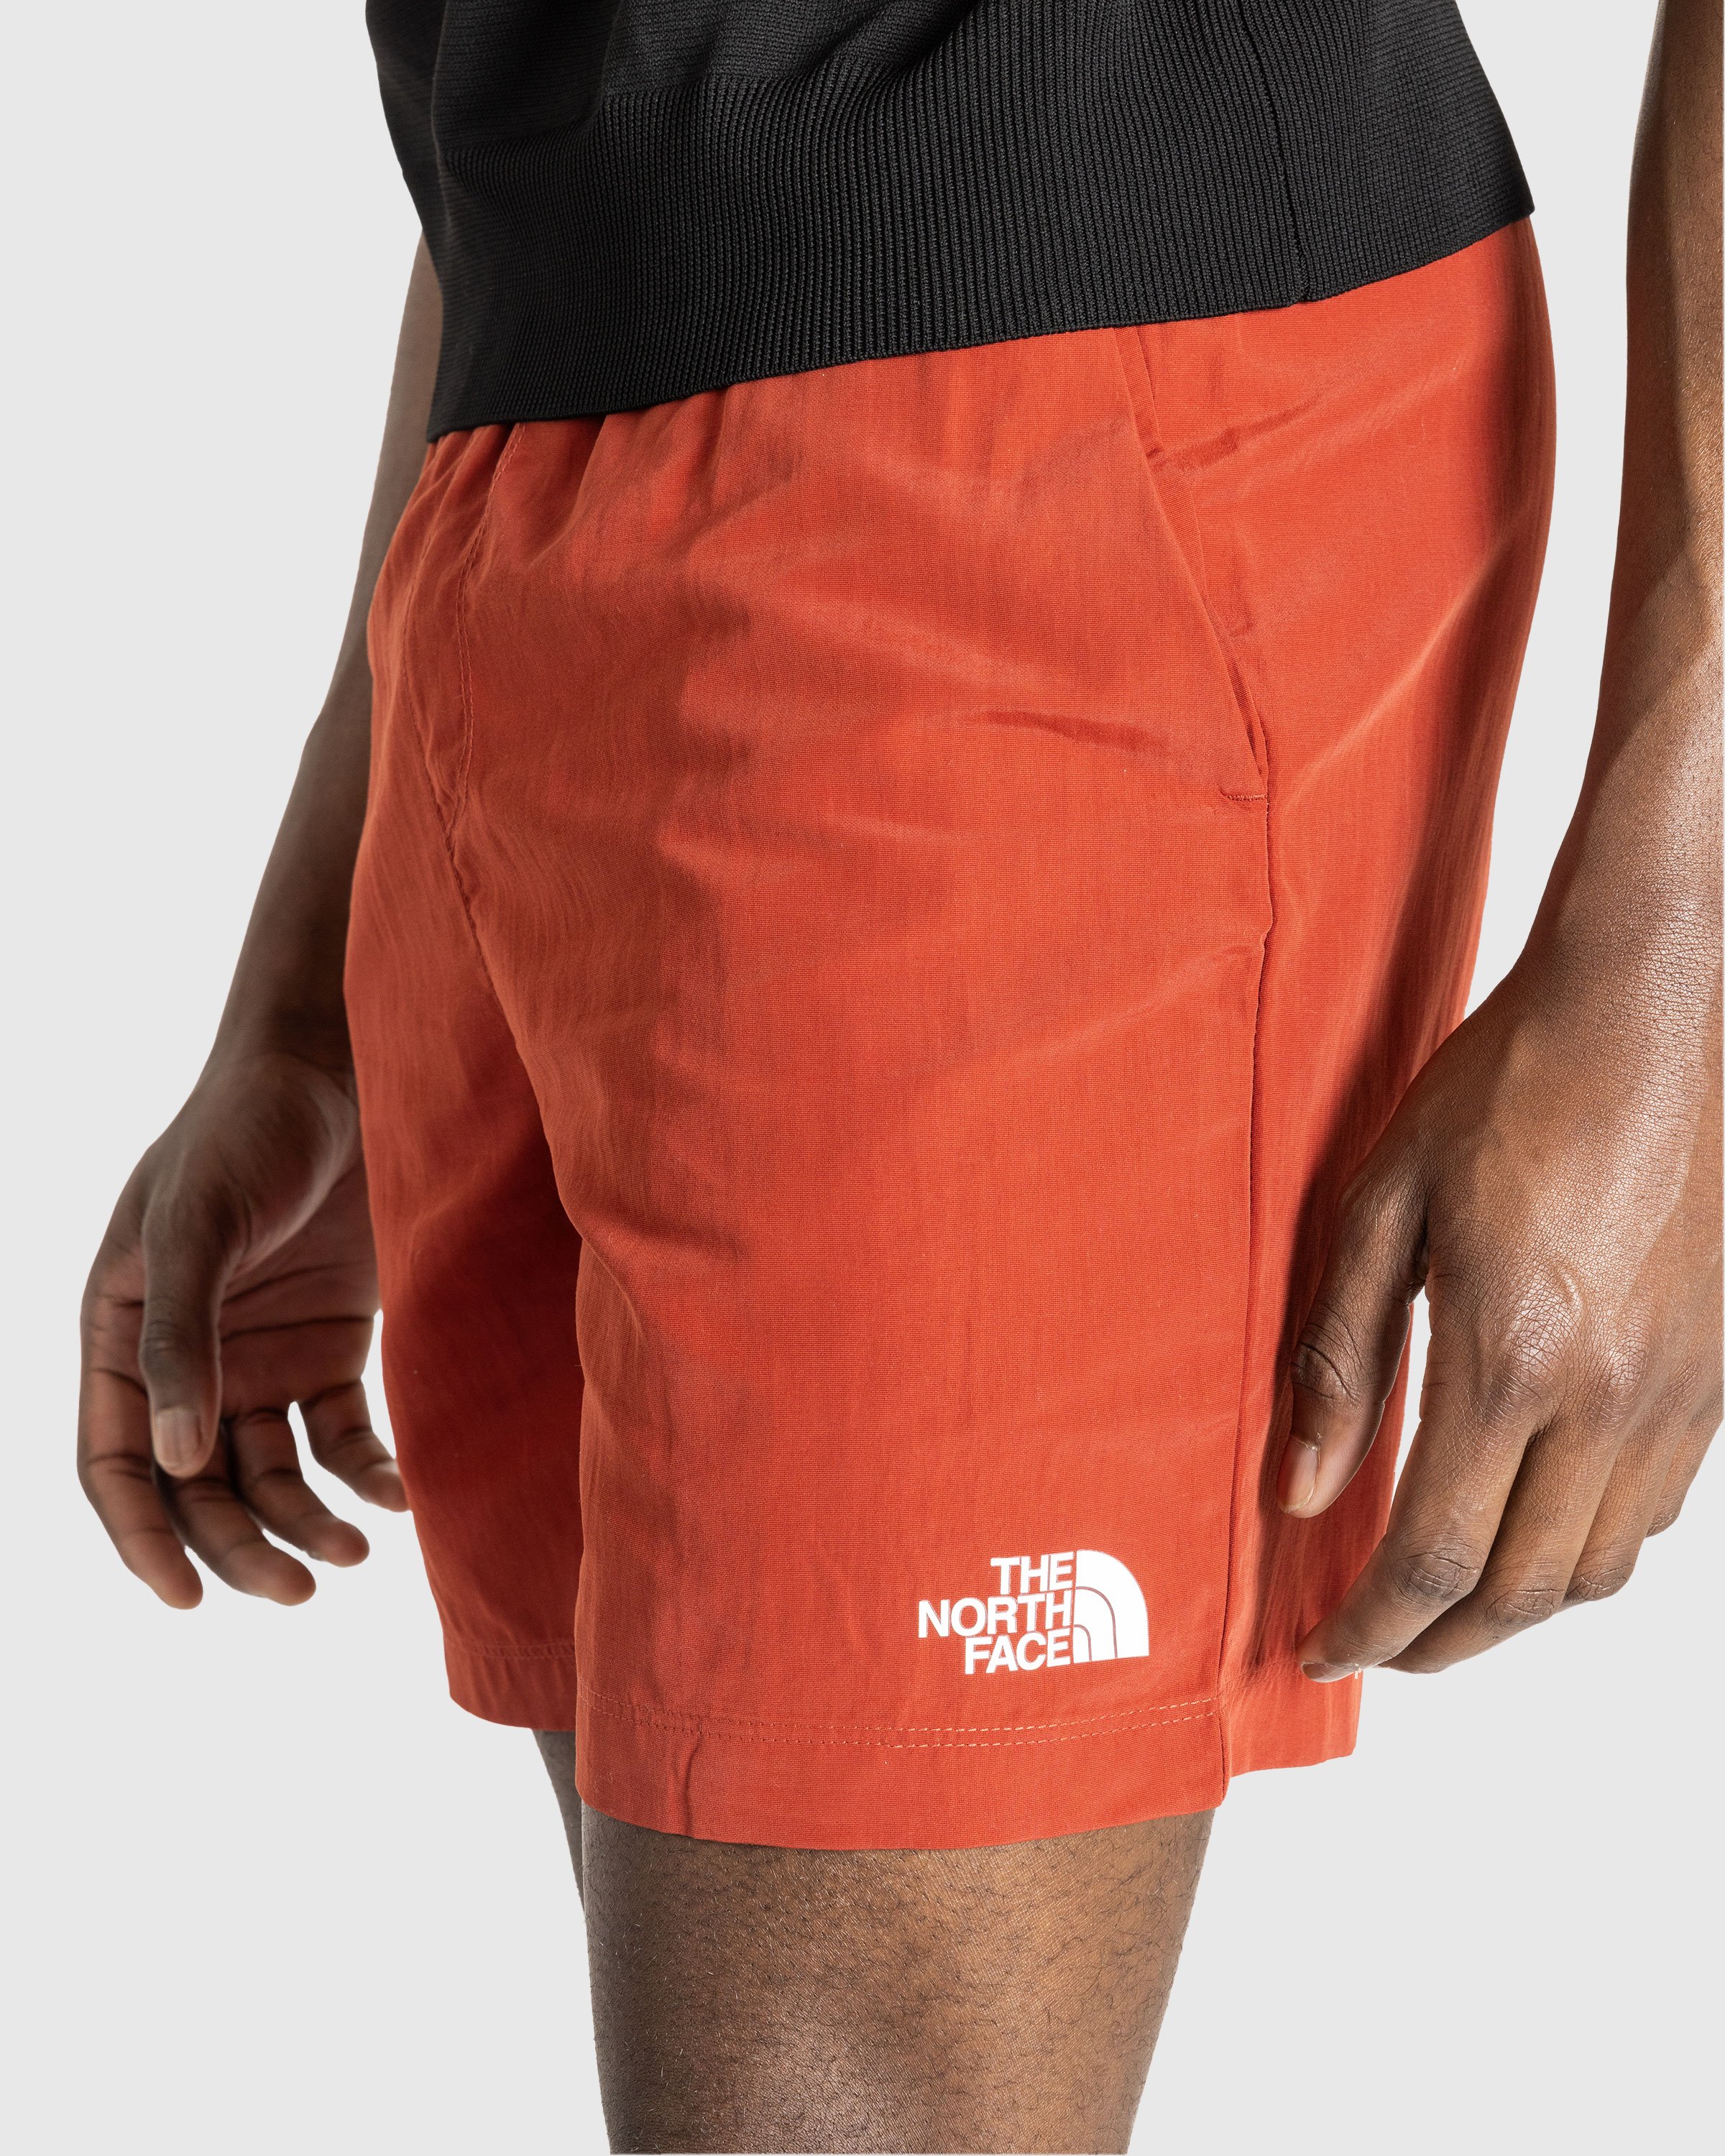 The North Face - M WATER SHORT - EU IRON RED - Clothing - Red - Image 5